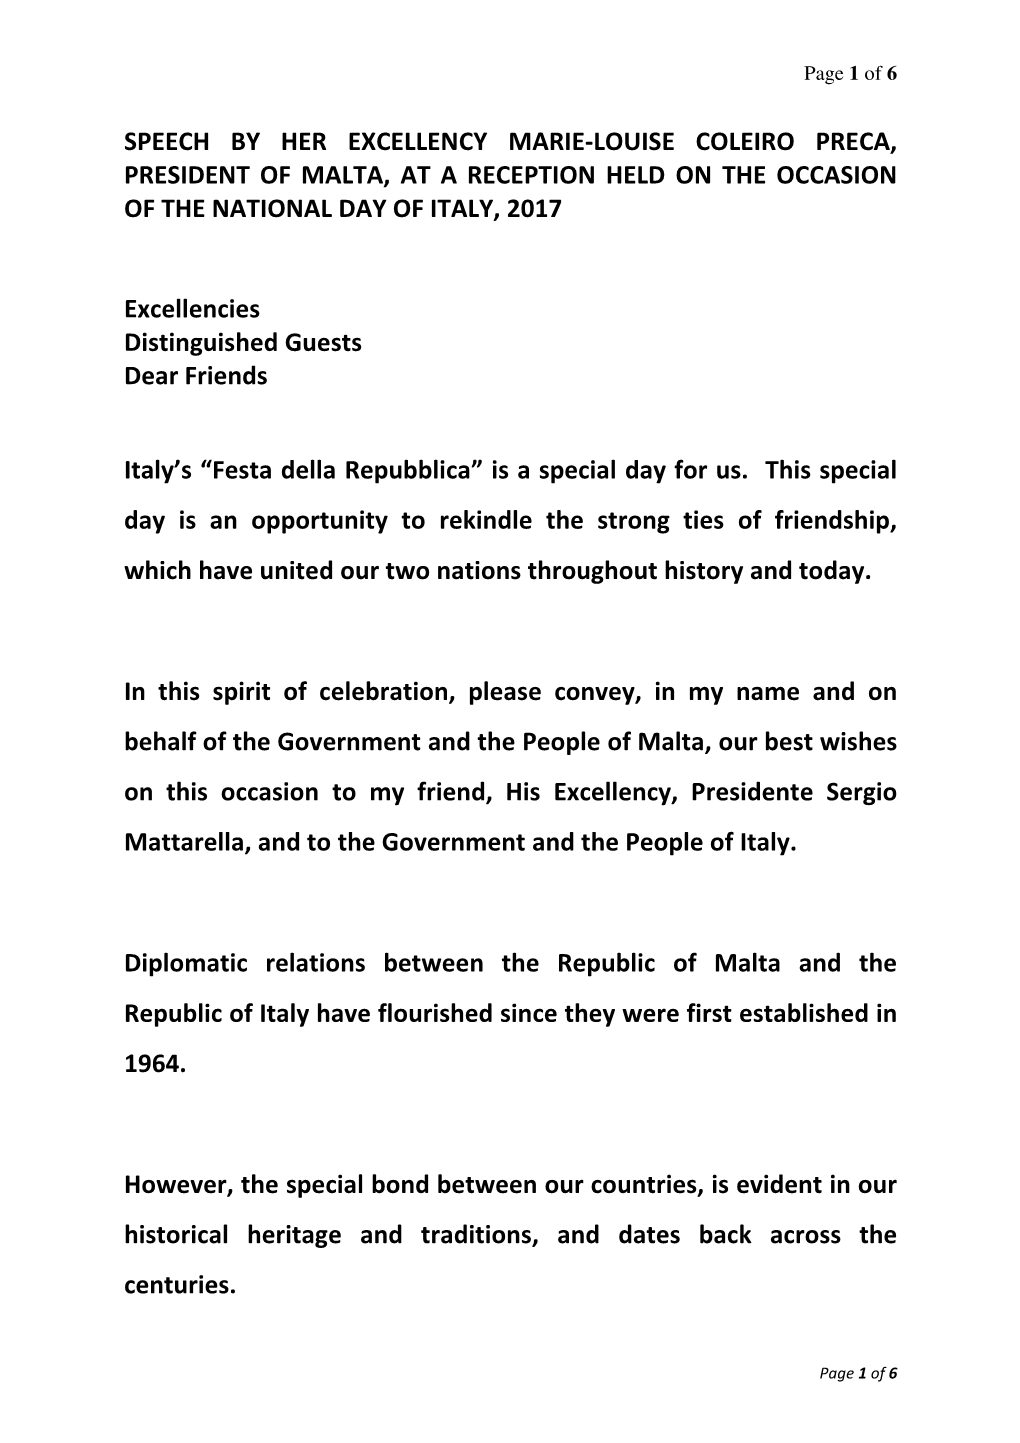 Speech by Her Excellency Marie-Louise Coleiro Preca, President of Malta, at a Reception Held on the Occasion of the National Day of Italy, 2017